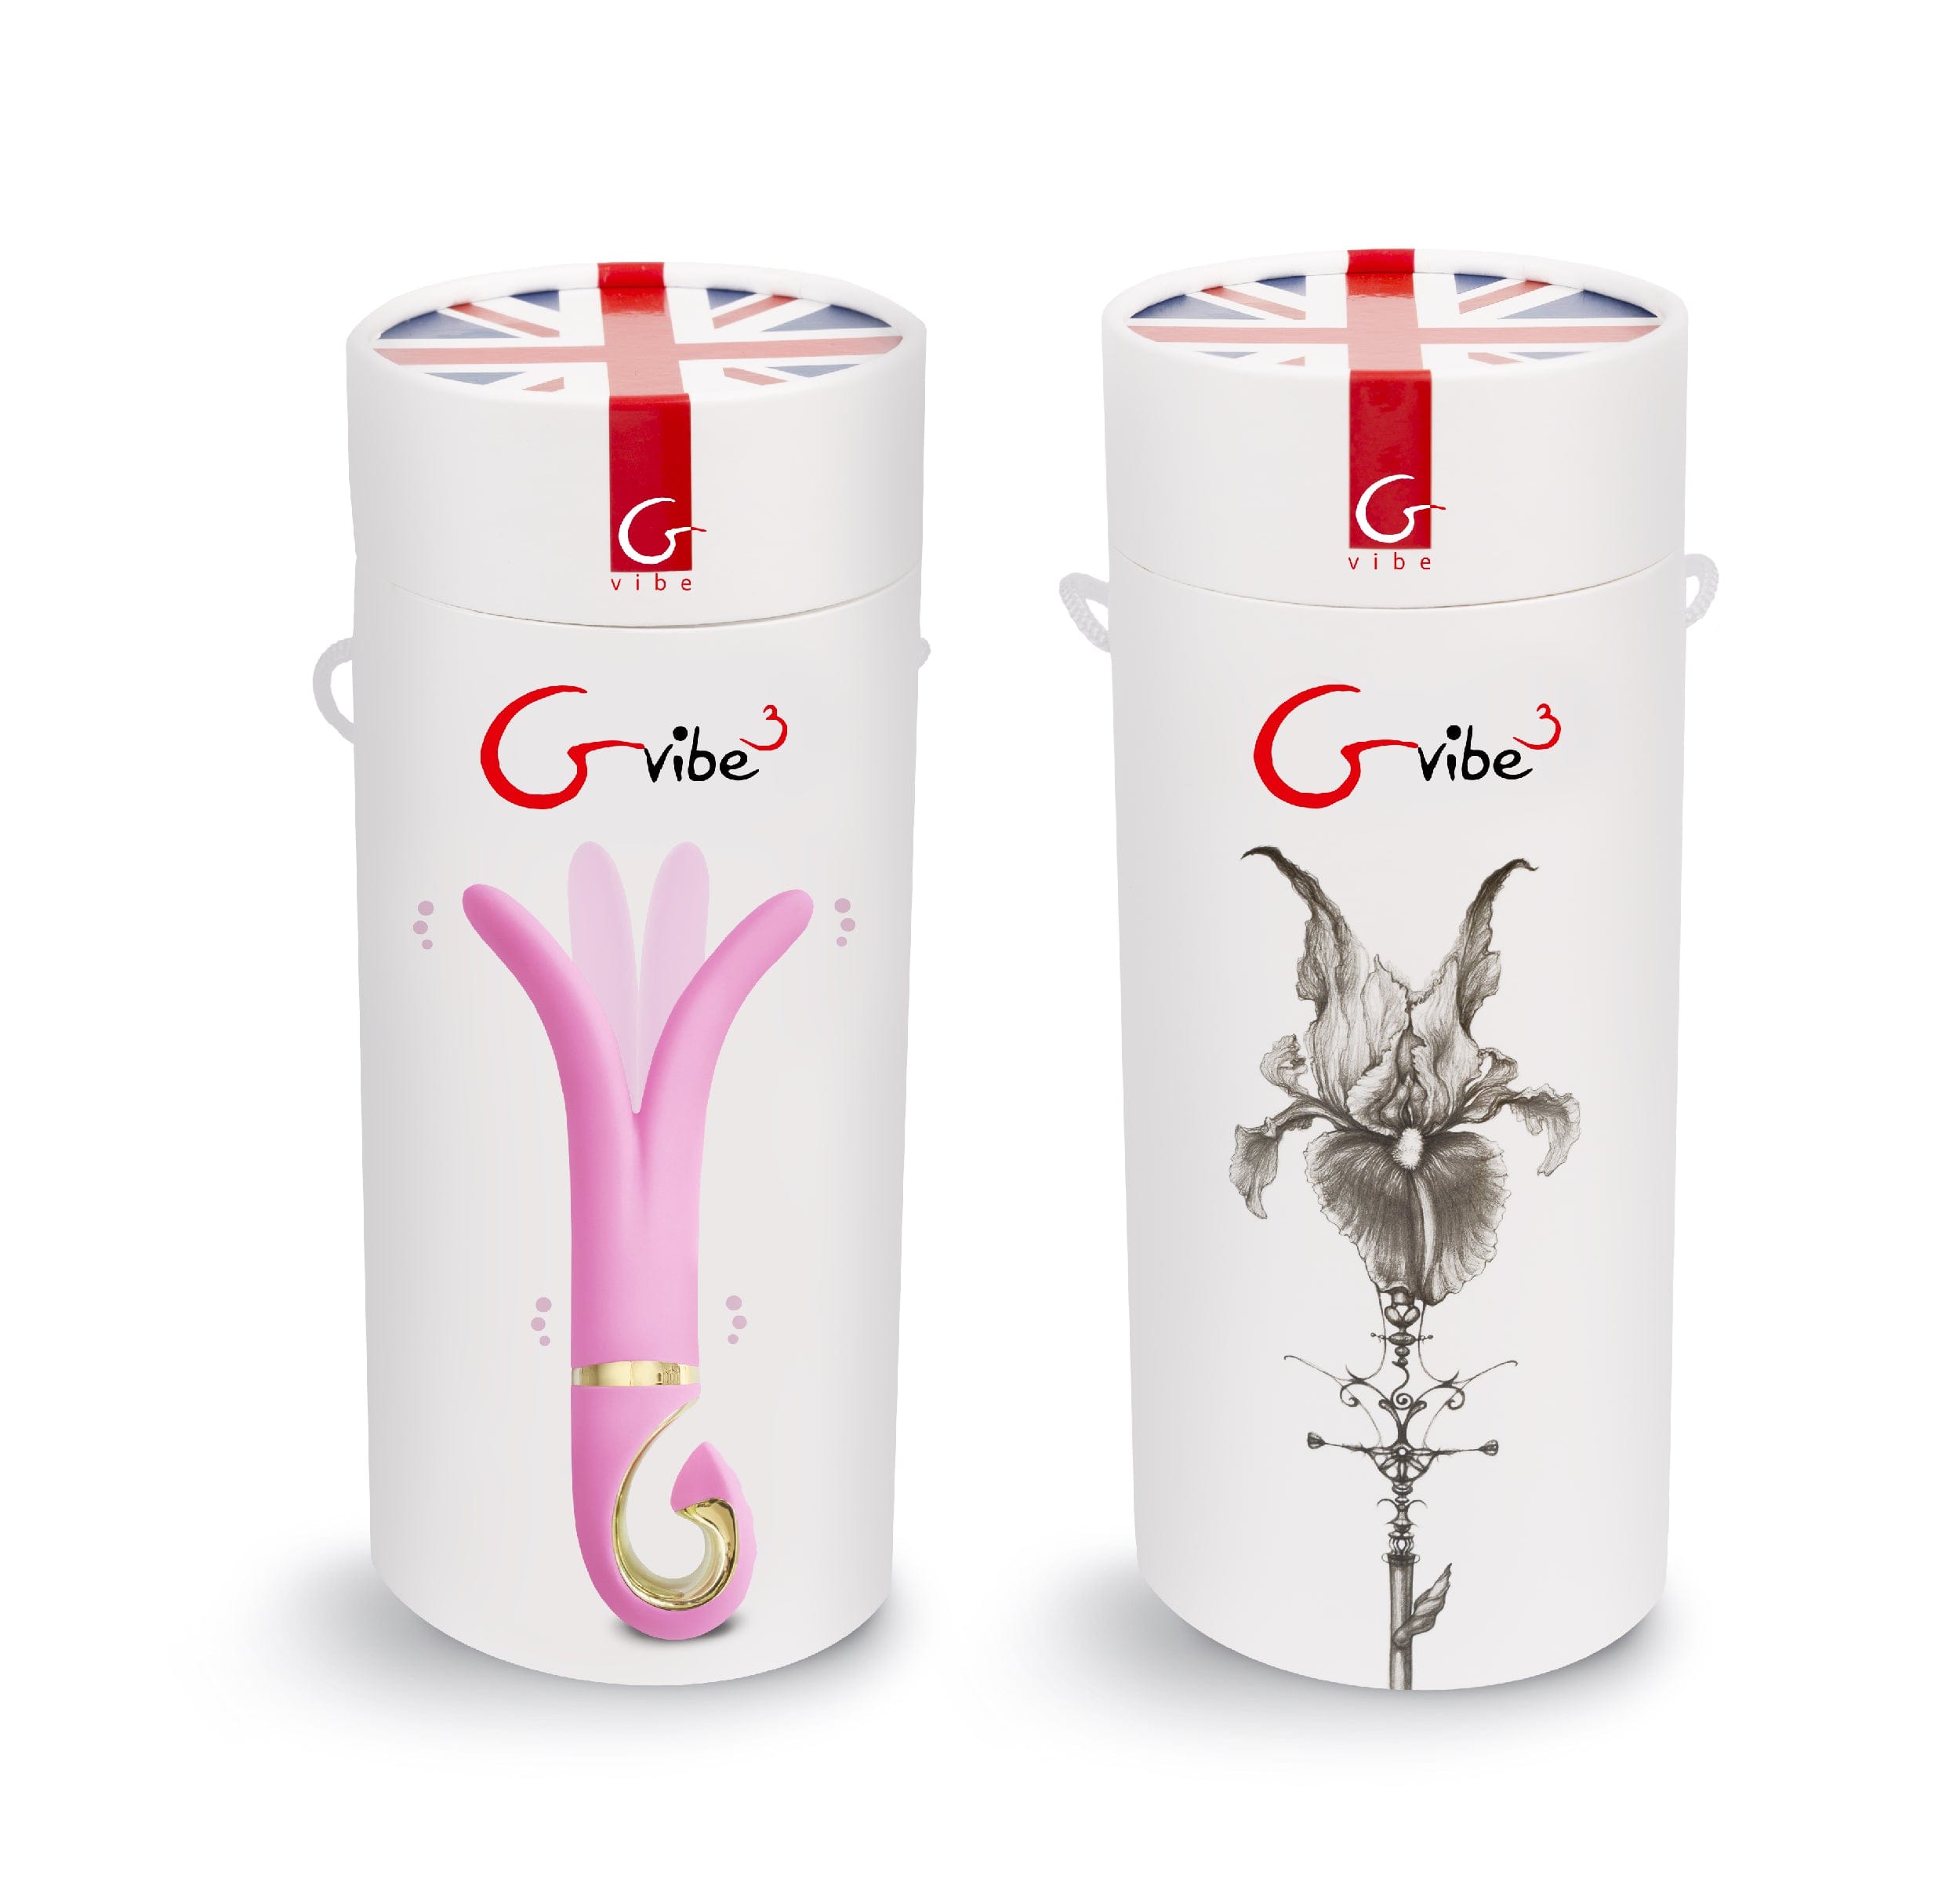 Gvibe Adult Toys Pink Gvibe 3 Candy Pink 5060320510417